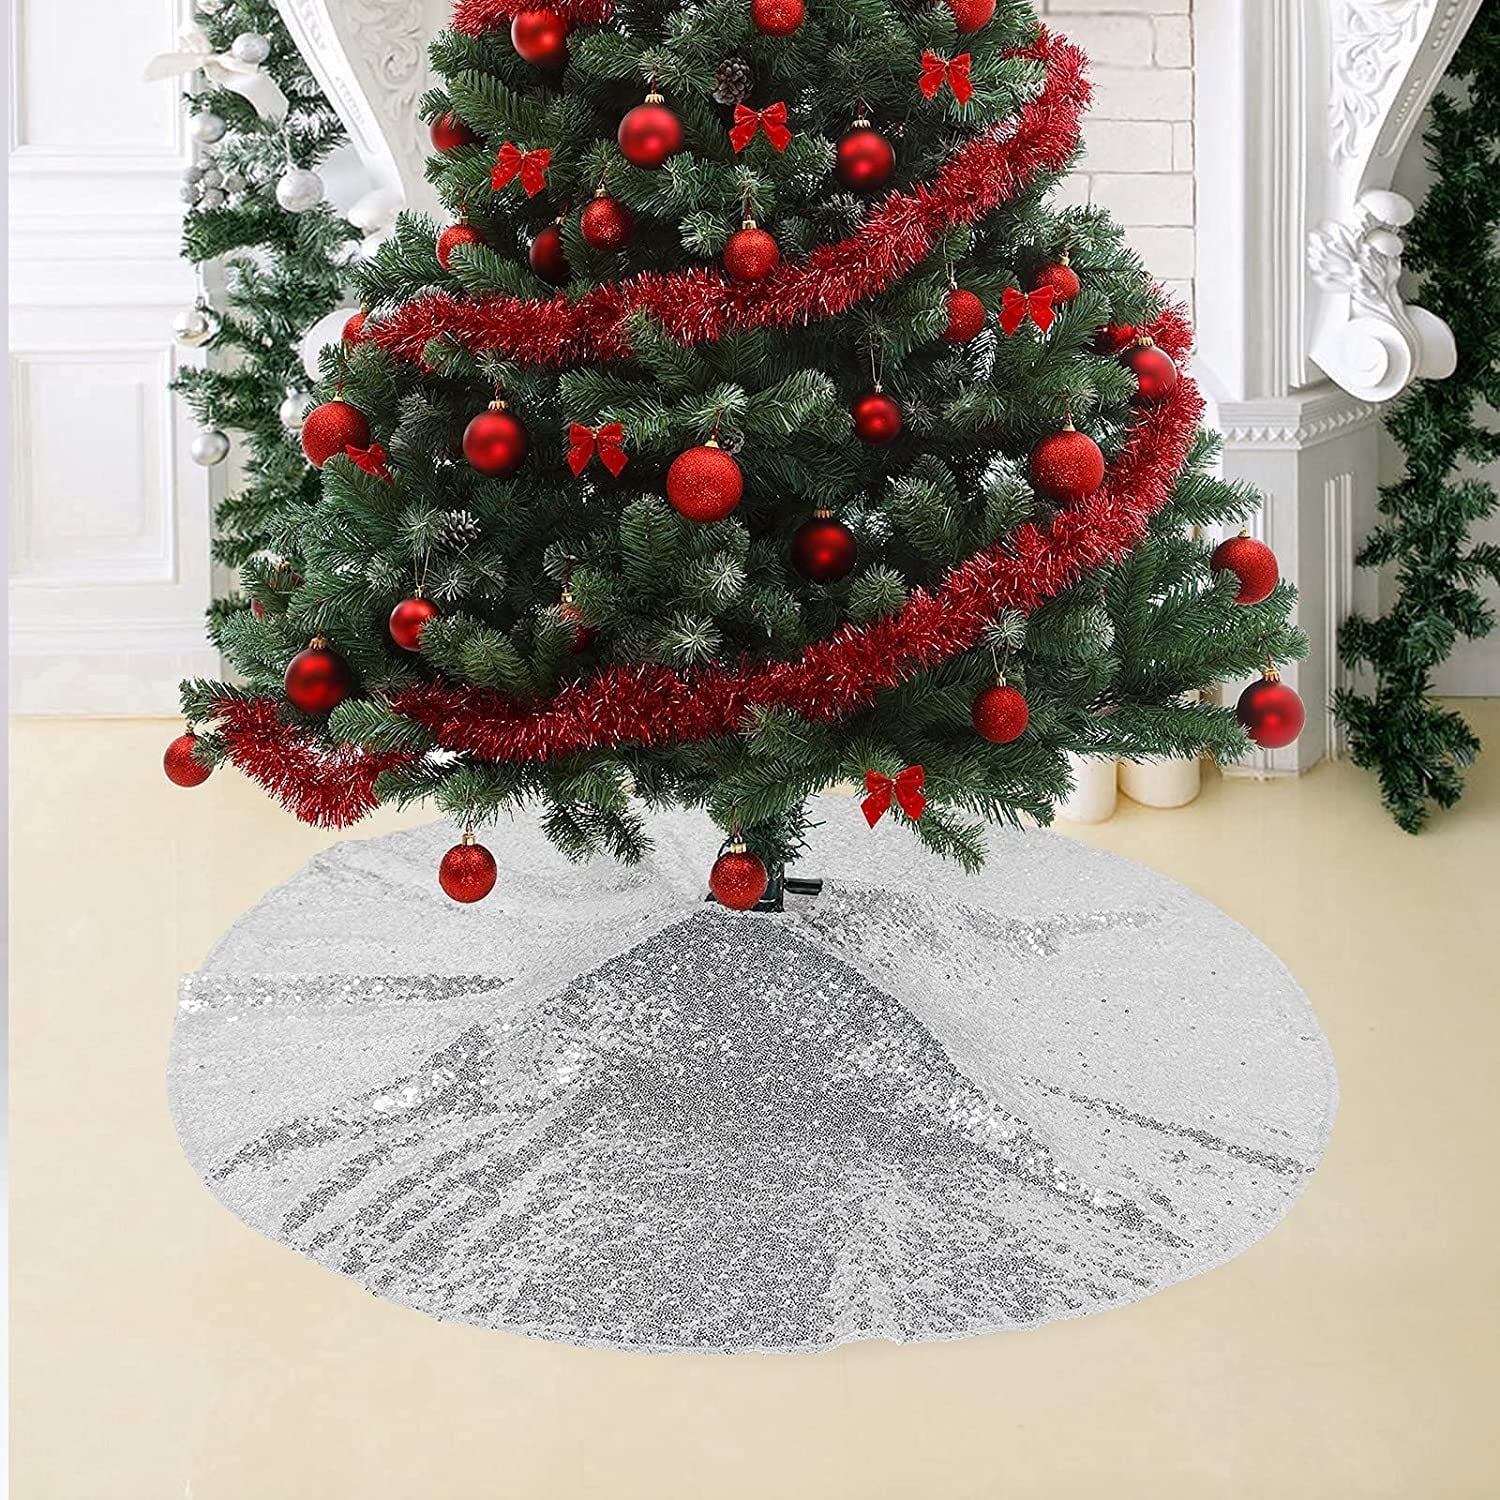 Details about   Christmas Tree Plush Toy Skirt Decor Merry Christmas Party For Christmas Tree 